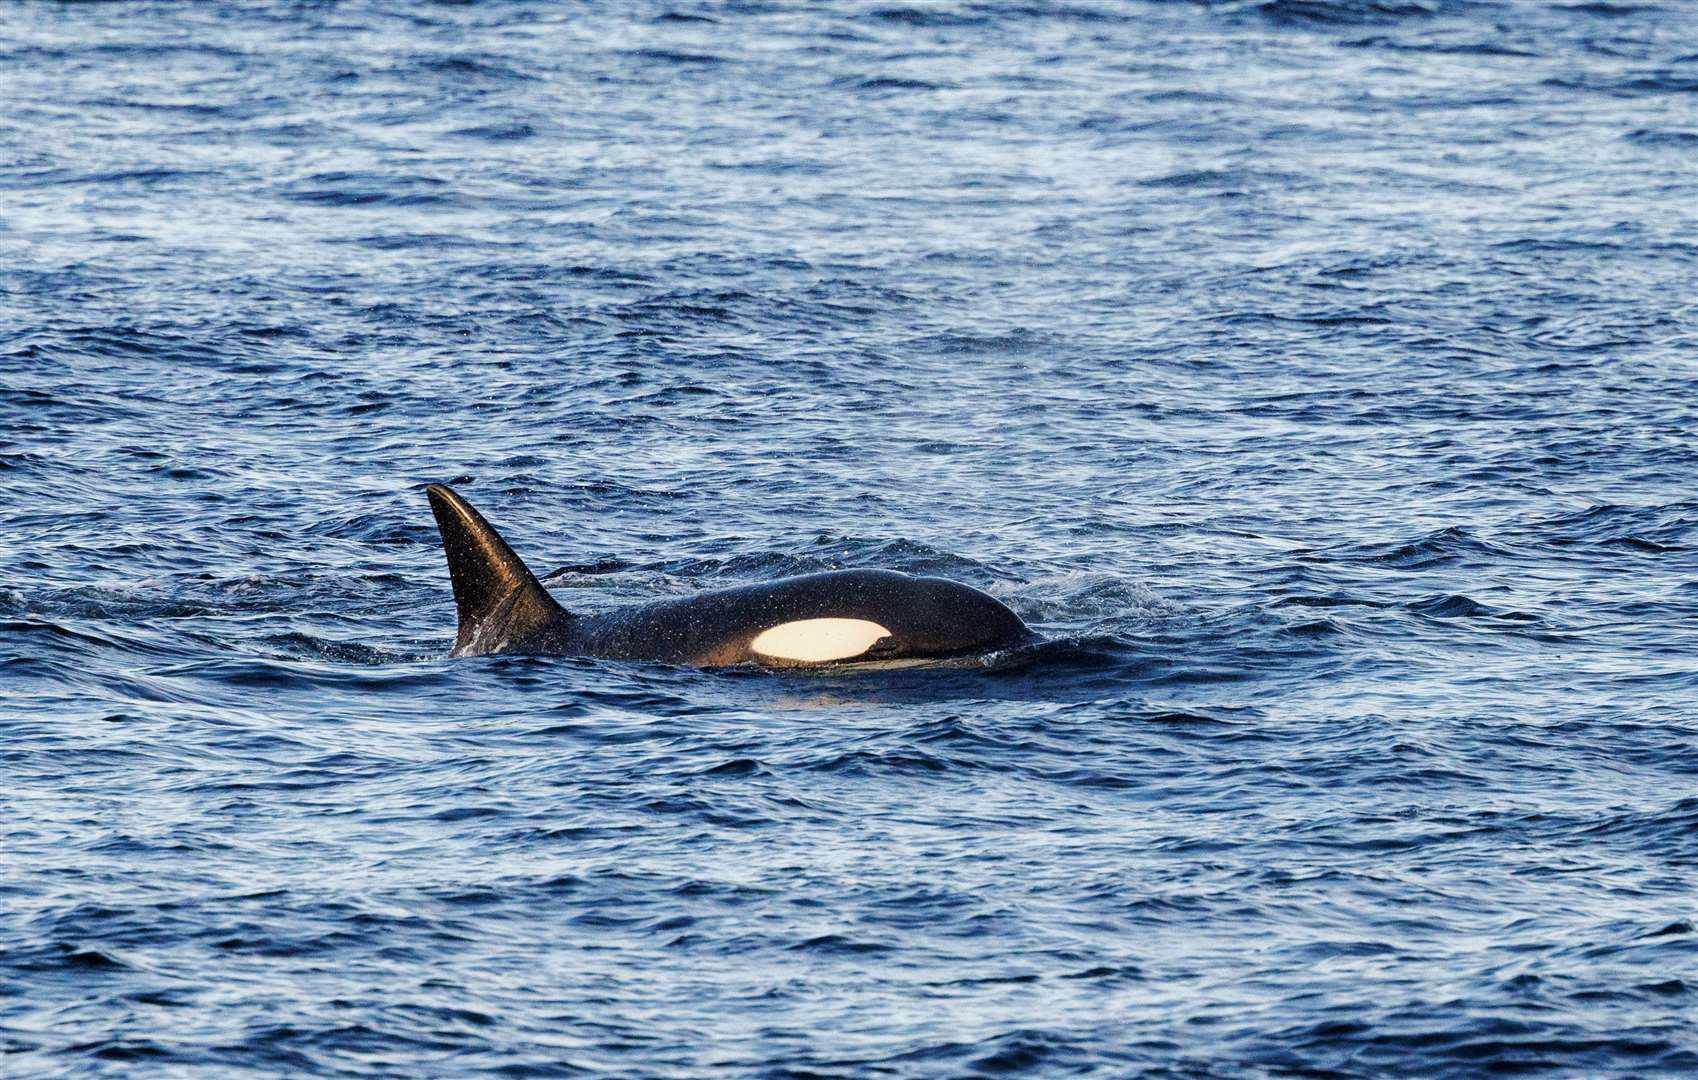 One of the group of eight orcas seen from the Pentland Venture on Thursday night's trip. Picture: Steve Truluck At Sea